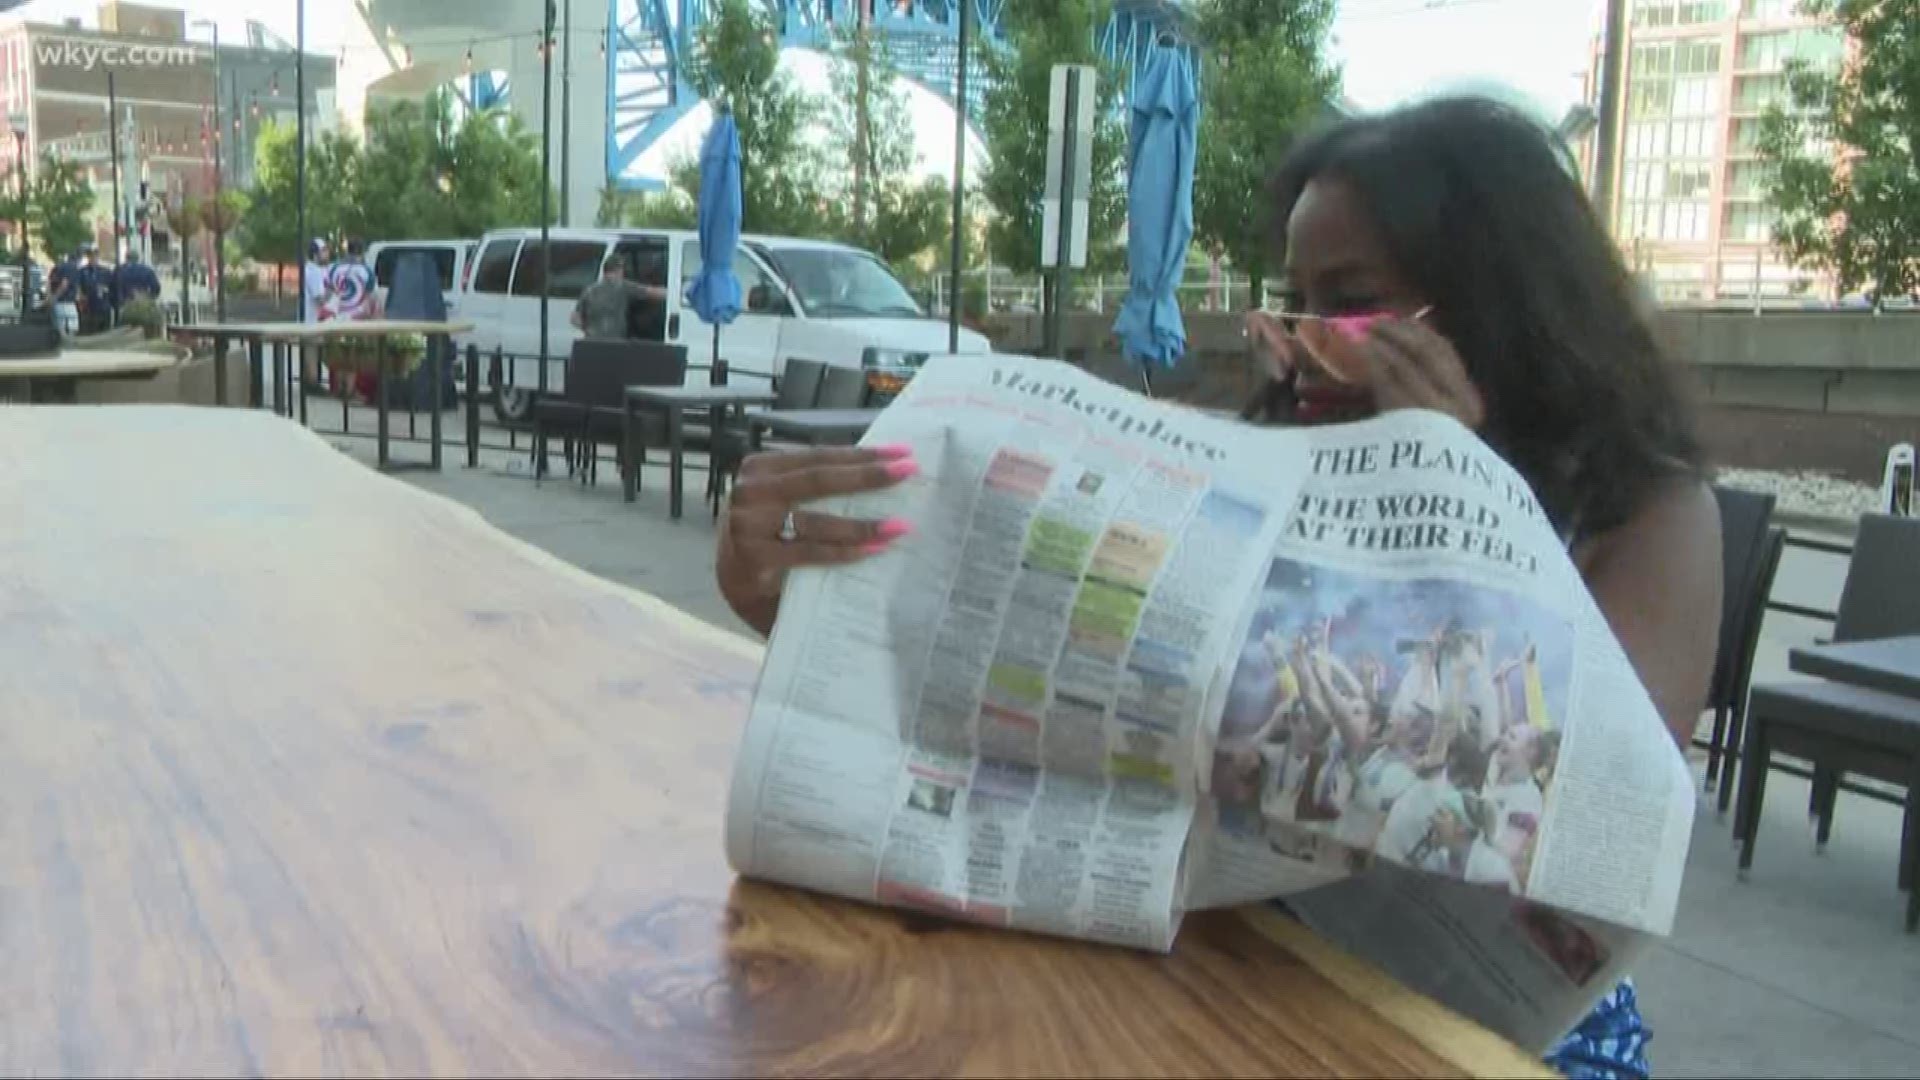 July 9, 2019: Have you seen any of the A-listers in town? Celebrities have filled Cleveland this week for the MLB All-Star Game at Progressive Field, so we sent Jasmine Monroe on an adventure throughout the city to see if she could find anybody with info on where the stars have been.